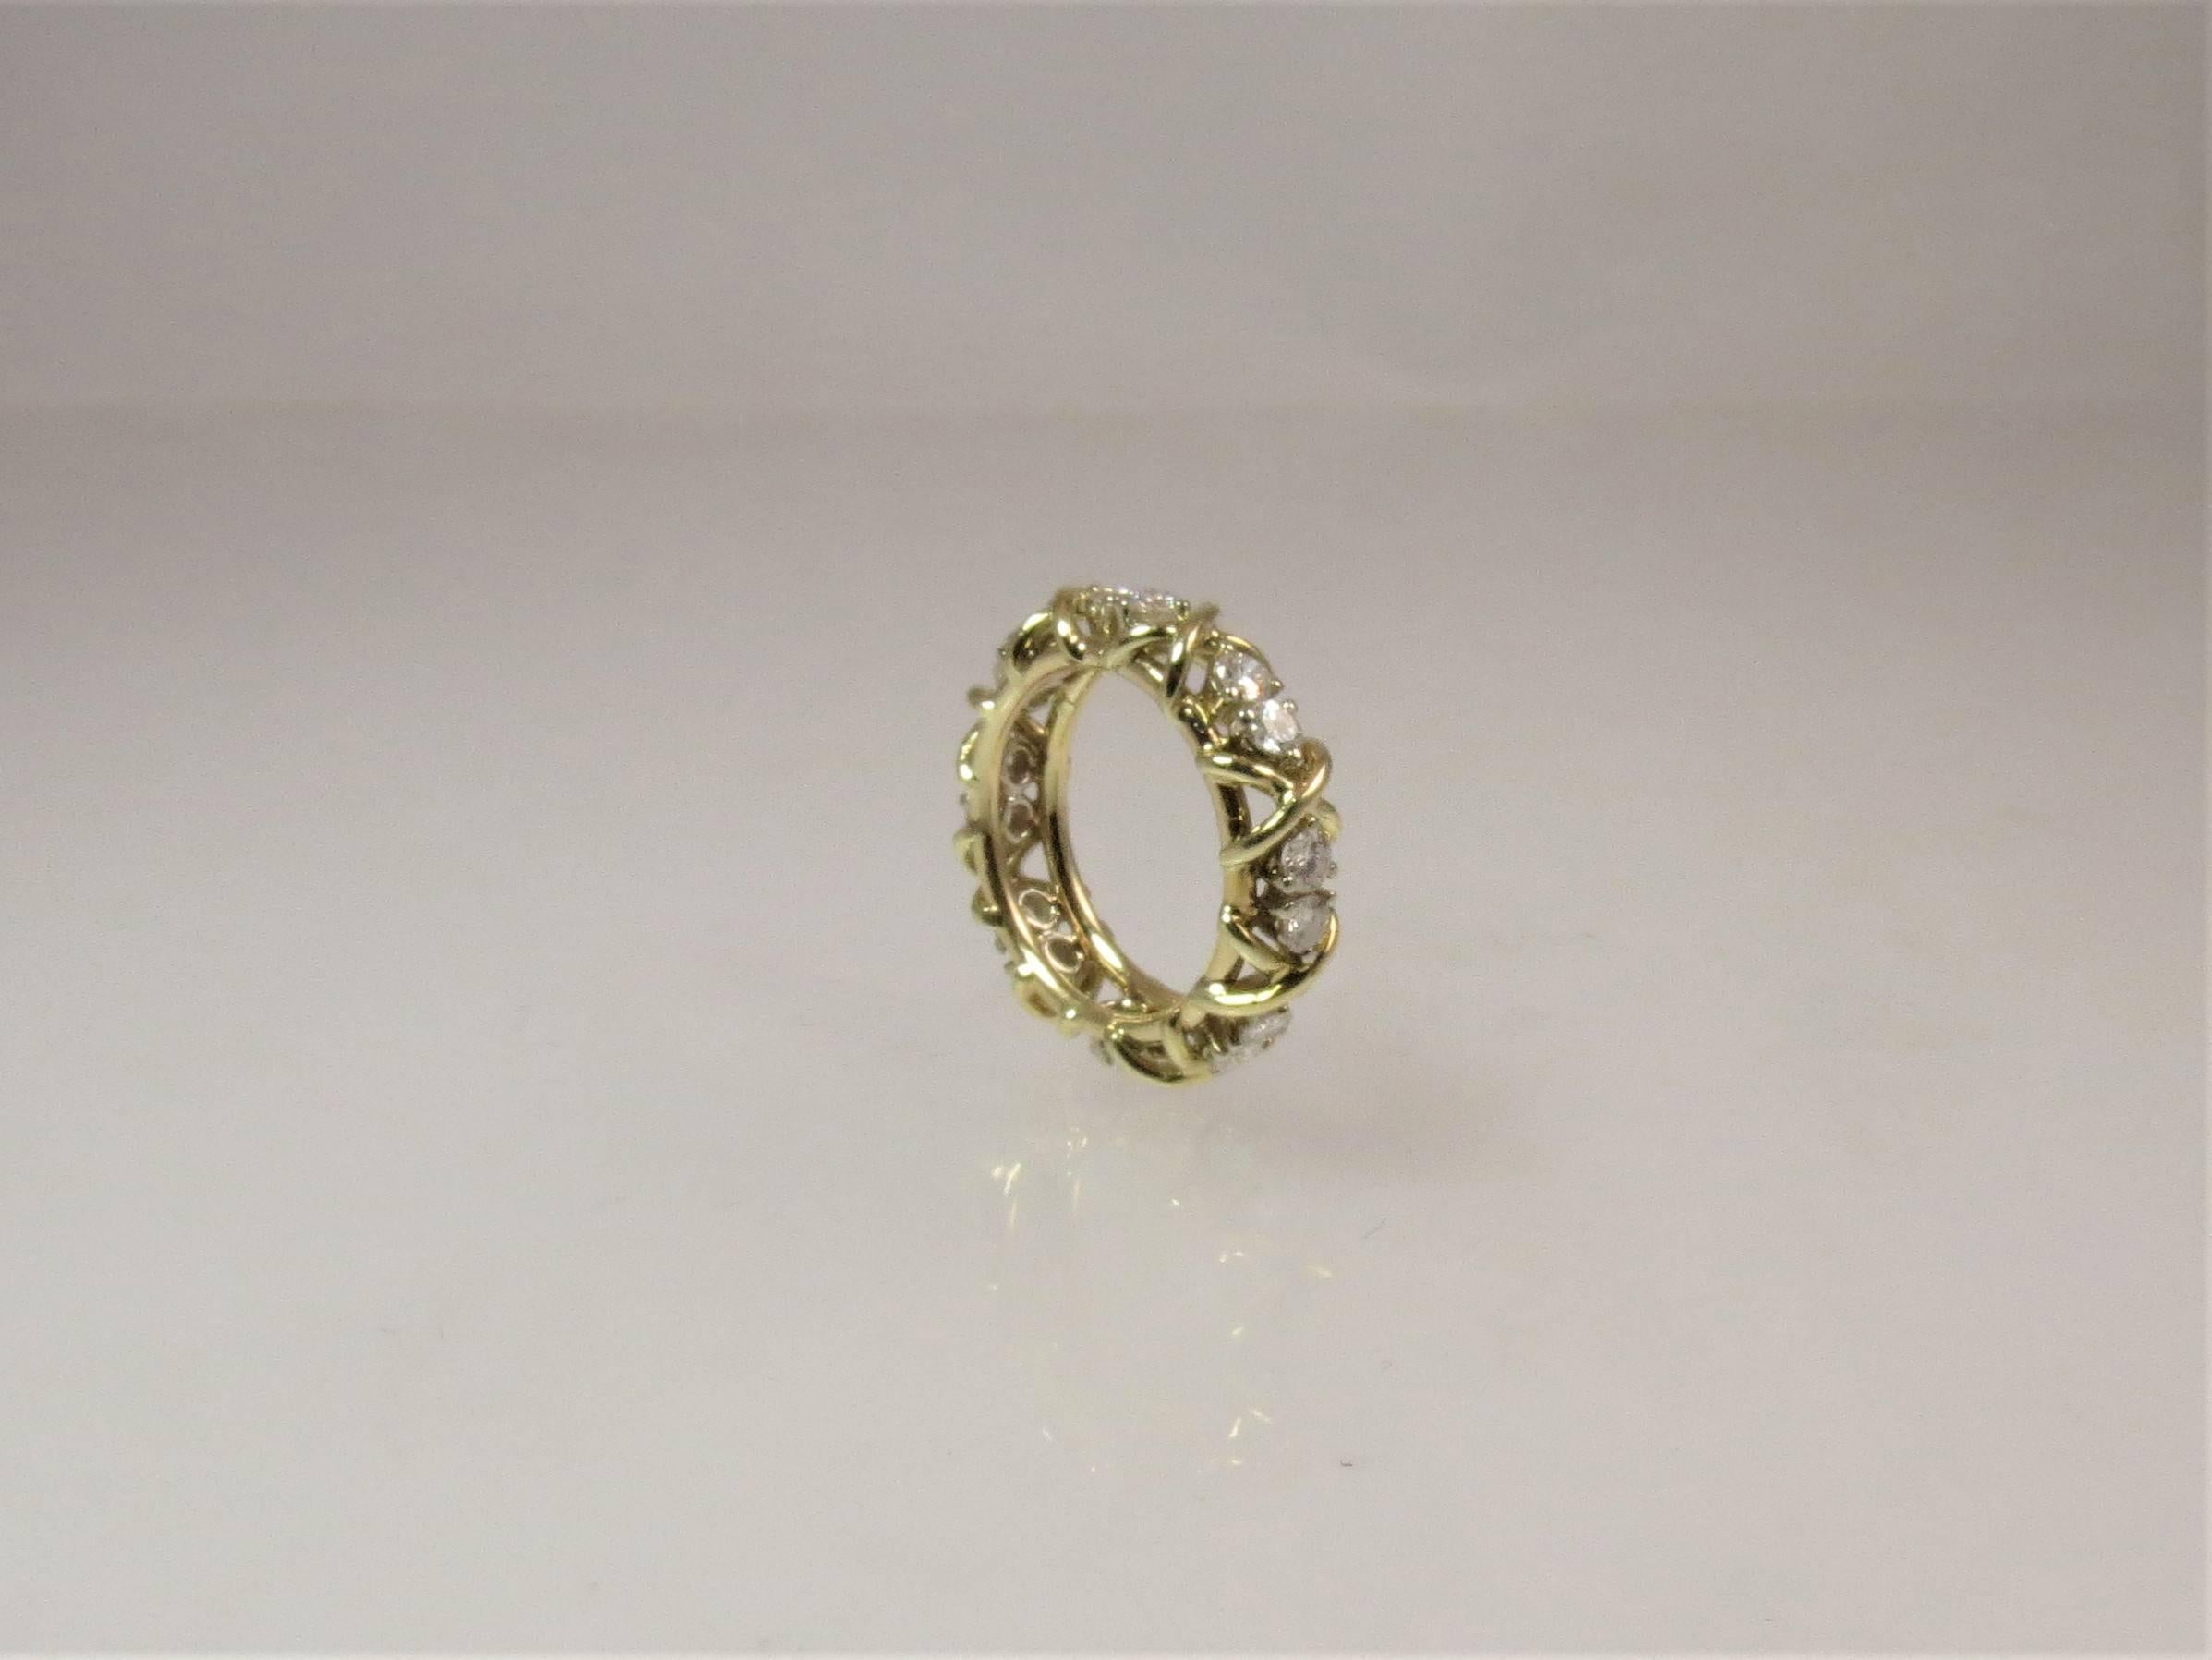 18K yellow gold band ring, set with 16 full cut round diamonds weighing 1.10cts, G-H color, VS clarity, with 18K yellow gold 